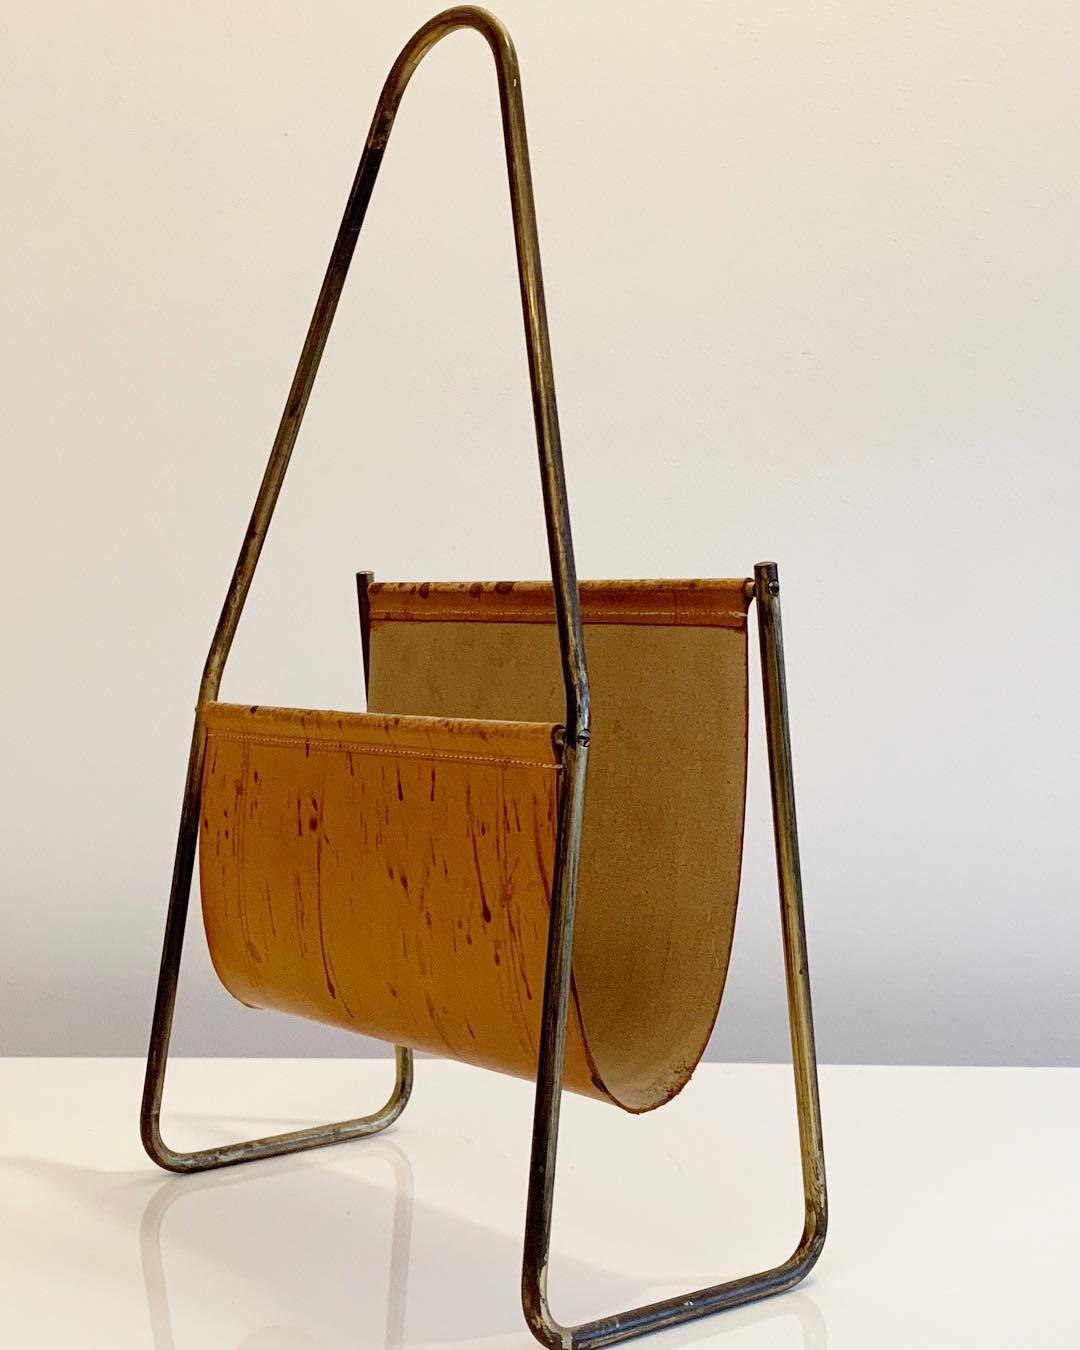 The fourth-generation Viennese workshop of Carl Auböck combines traditional craftsmanship with modern design. Designed in the 1950s by Carl Auböck II, this modern accent piece features tan leather and a lustrous brass frame. The resulting sling